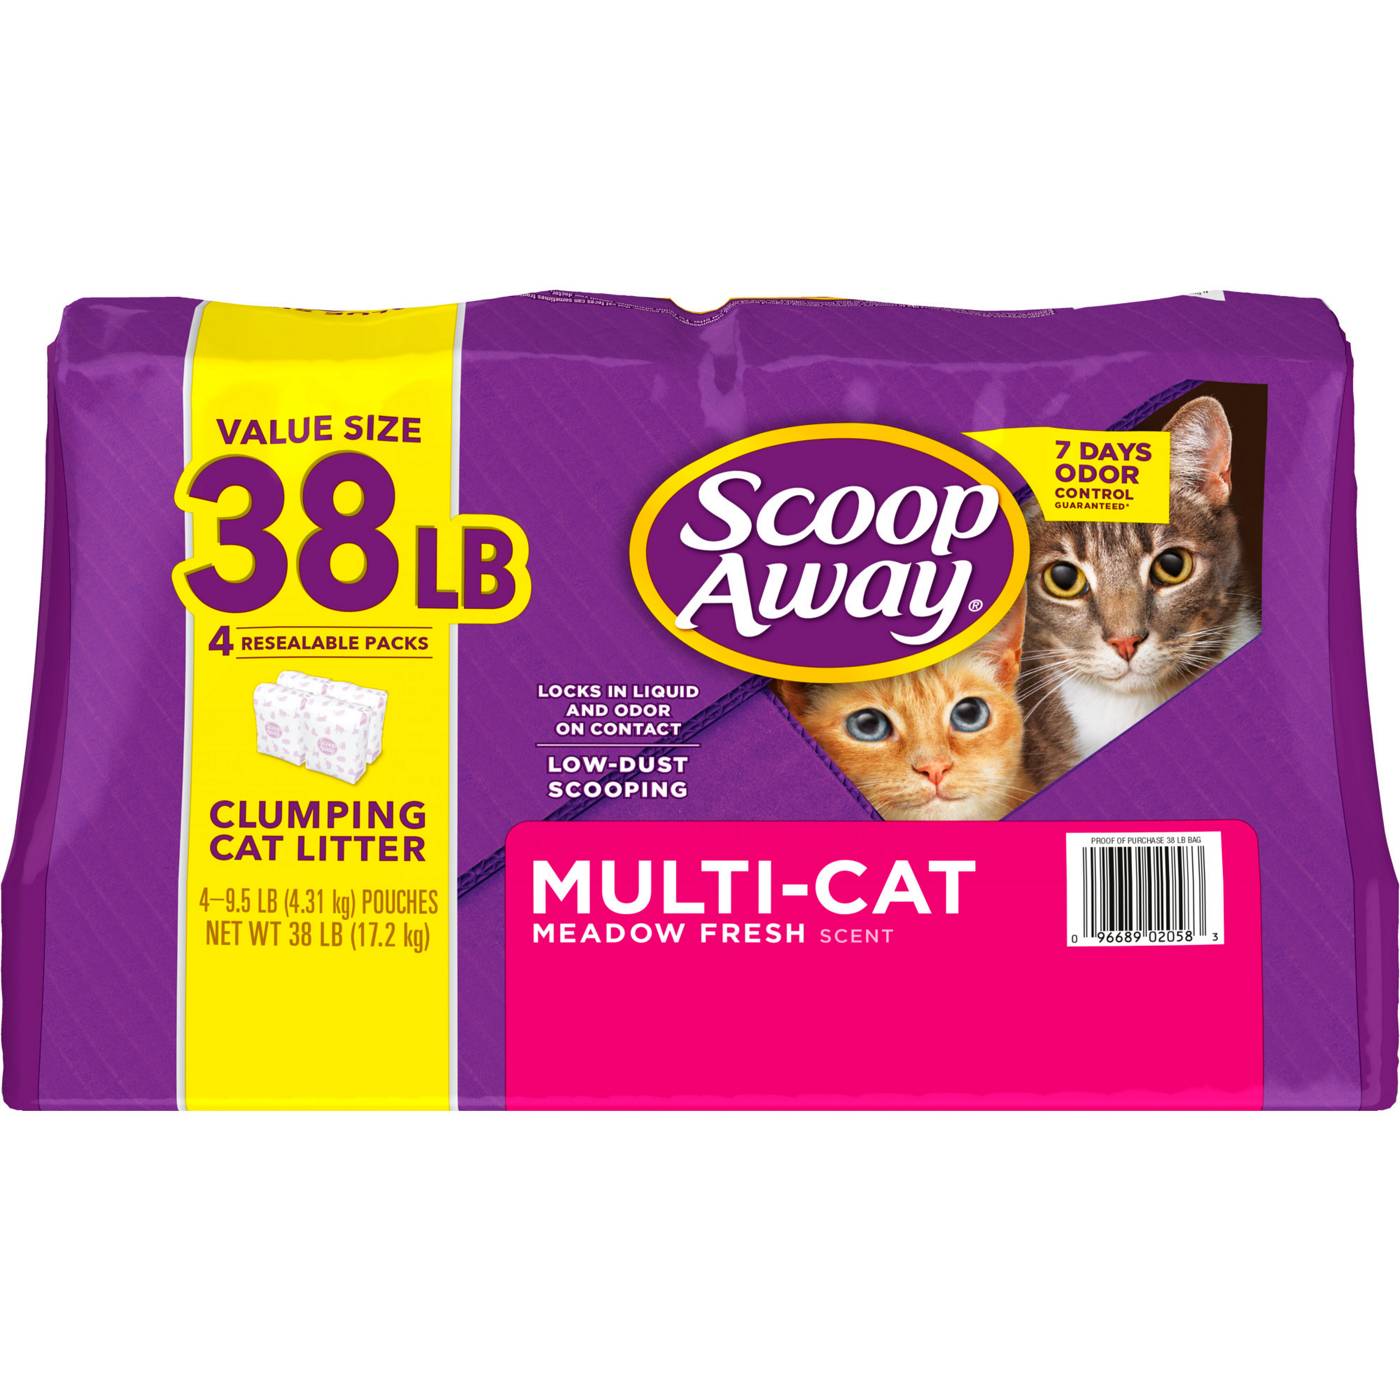 Scoop Away Multi Cat Clumping Cat Litter, Meadow Fresh Scent; image 4 of 5